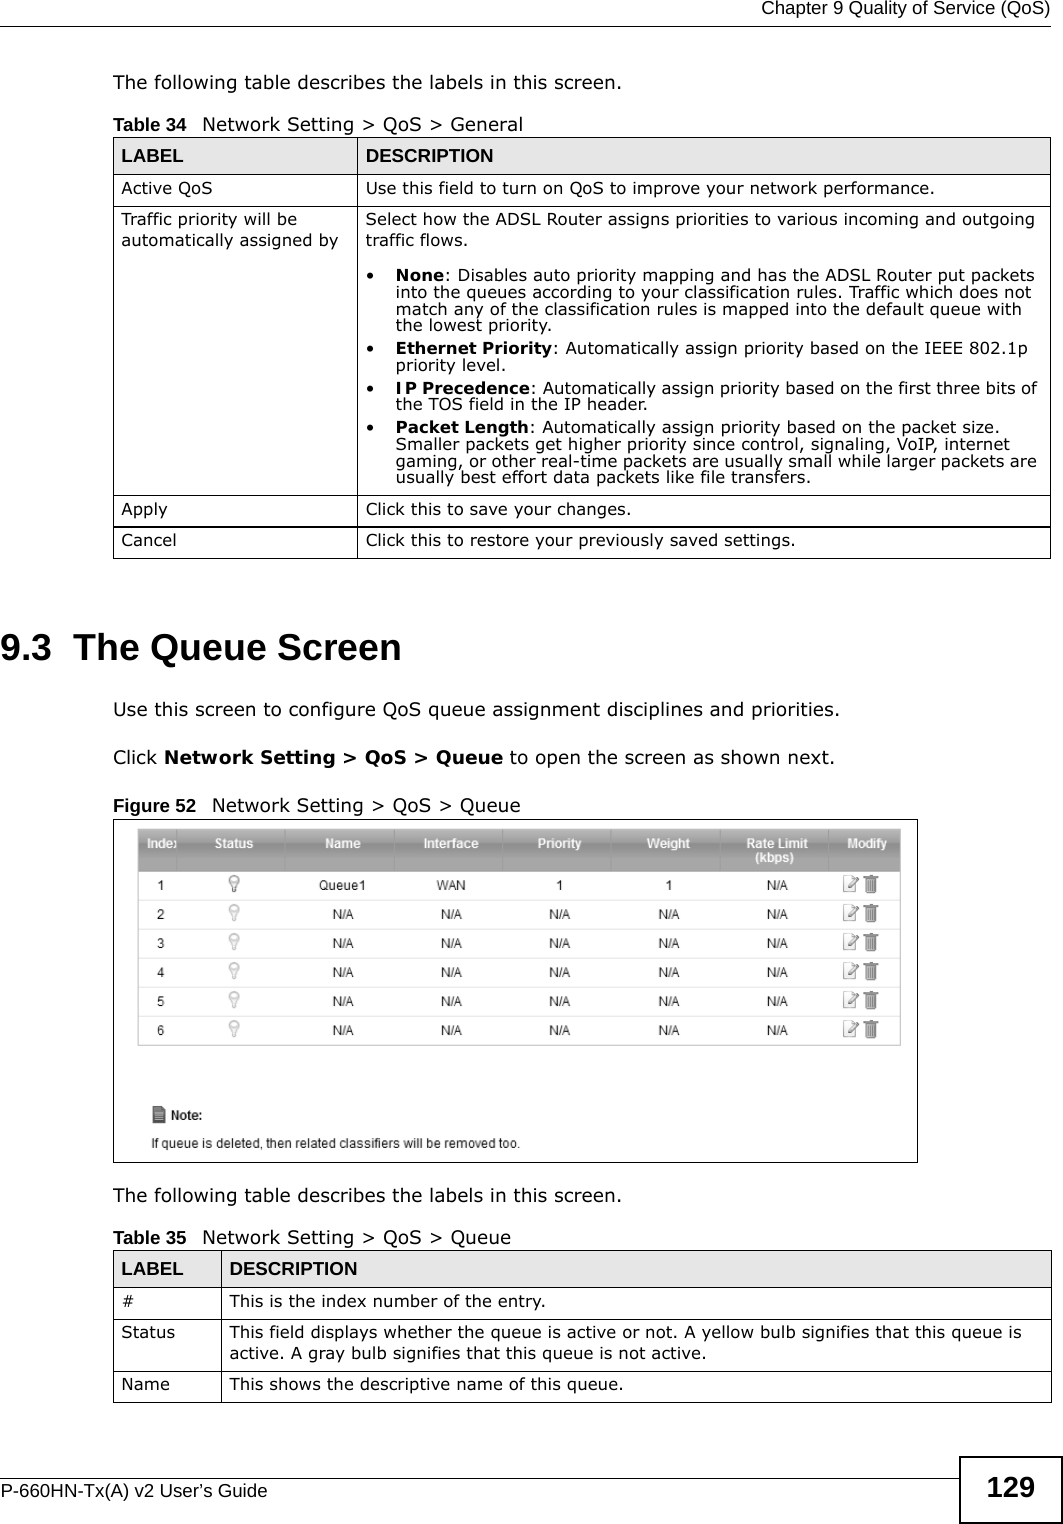  Chapter 9 Quality of Service (QoS)P-660HN-Tx(A) v2 User’s Guide 129The following table describes the labels in this screen. 9.3  The Queue ScreenUse this screen to configure QoS queue assignment disciplines and priorities.Click Network Setting &gt; QoS &gt; Queue to open the screen as shown next.Figure 52   Network Setting &gt; QoS &gt; QueueThe following table describes the labels in this screen. Table 34   Network Setting &gt; QoS &gt; GeneralLABEL DESCRIPTIONActive QoS Use this field to turn on QoS to improve your network performance.Traffic priority will be automatically assigned by Select how the ADSL Router assigns priorities to various incoming and outgoing traffic flows.•None: Disables auto priority mapping and has the ADSL Router put packets into the queues according to your classification rules. Traffic which does not match any of the classification rules is mapped into the default queue with the lowest priority.•Ethernet Priority: Automatically assign priority based on the IEEE 802.1p priority level.•IP Precedence: Automatically assign priority based on the first three bits of the TOS field in the IP header.•Packet Length: Automatically assign priority based on the packet size. Smaller packets get higher priority since control, signaling, VoIP, internet gaming, or other real-time packets are usually small while larger packets are usually best effort data packets like file transfers.Apply Click this to save your changes.Cancel Click this to restore your previously saved settings.Table 35   Network Setting &gt; QoS &gt; QueueLABEL DESCRIPTION#This is the index number of the entry.Status This field displays whether the queue is active or not. A yellow bulb signifies that this queue is active. A gray bulb signifies that this queue is not active.Name This shows the descriptive name of this queue.